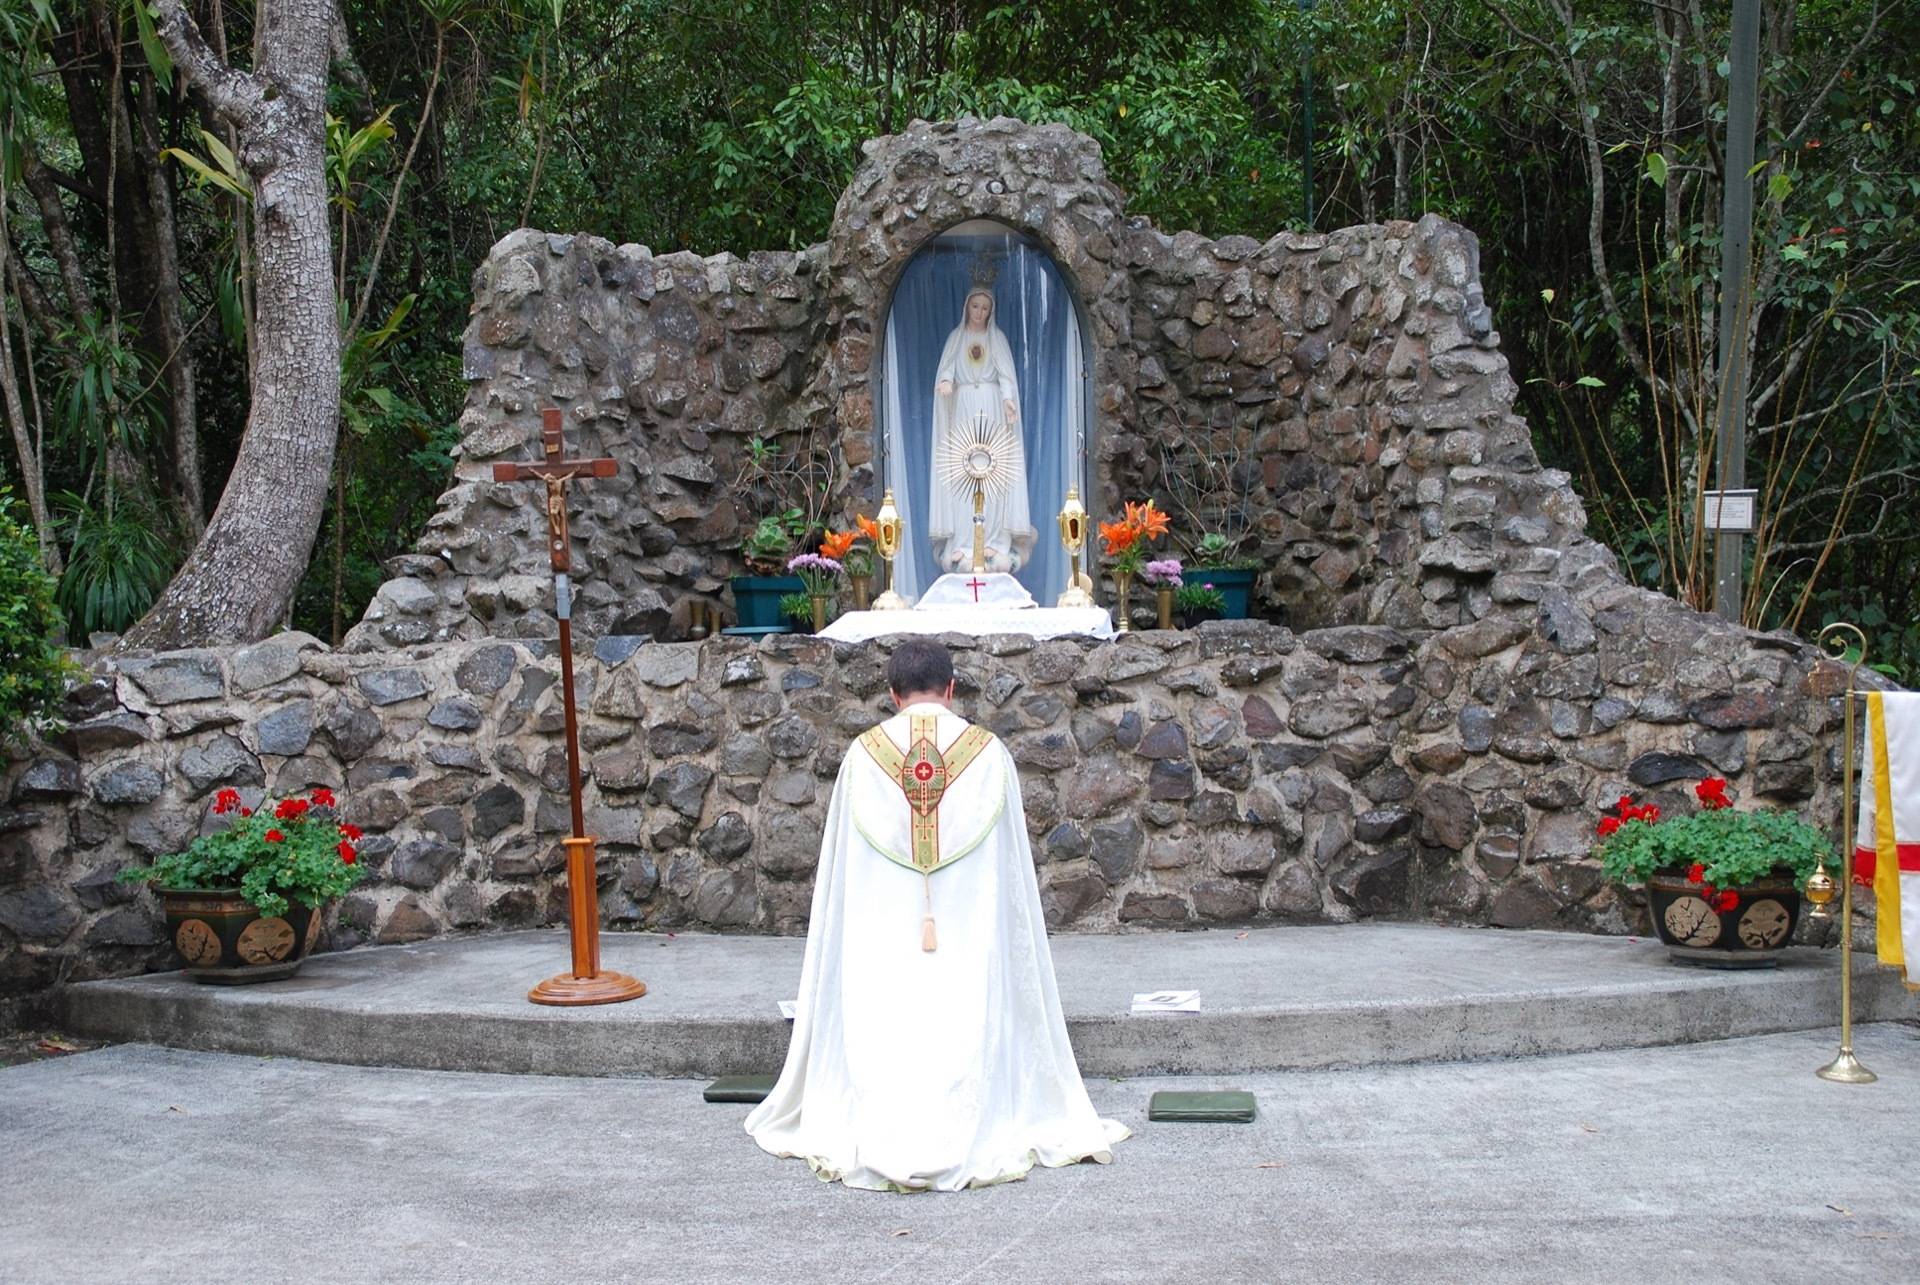 Fr. Albert leading devotions at the Fatima Grotto.